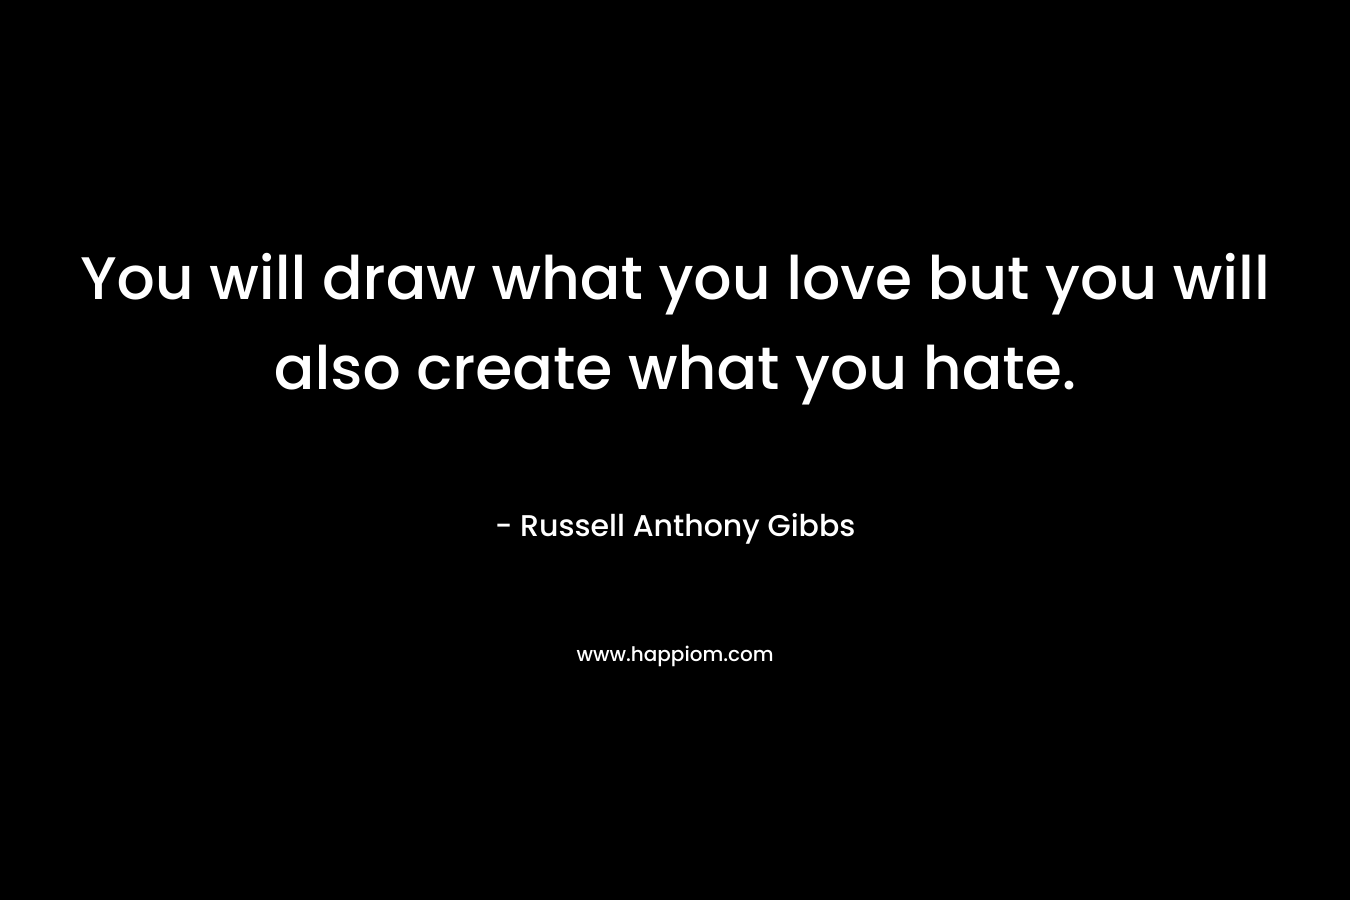 You will draw what you love but you will also create what you hate. – Russell Anthony Gibbs